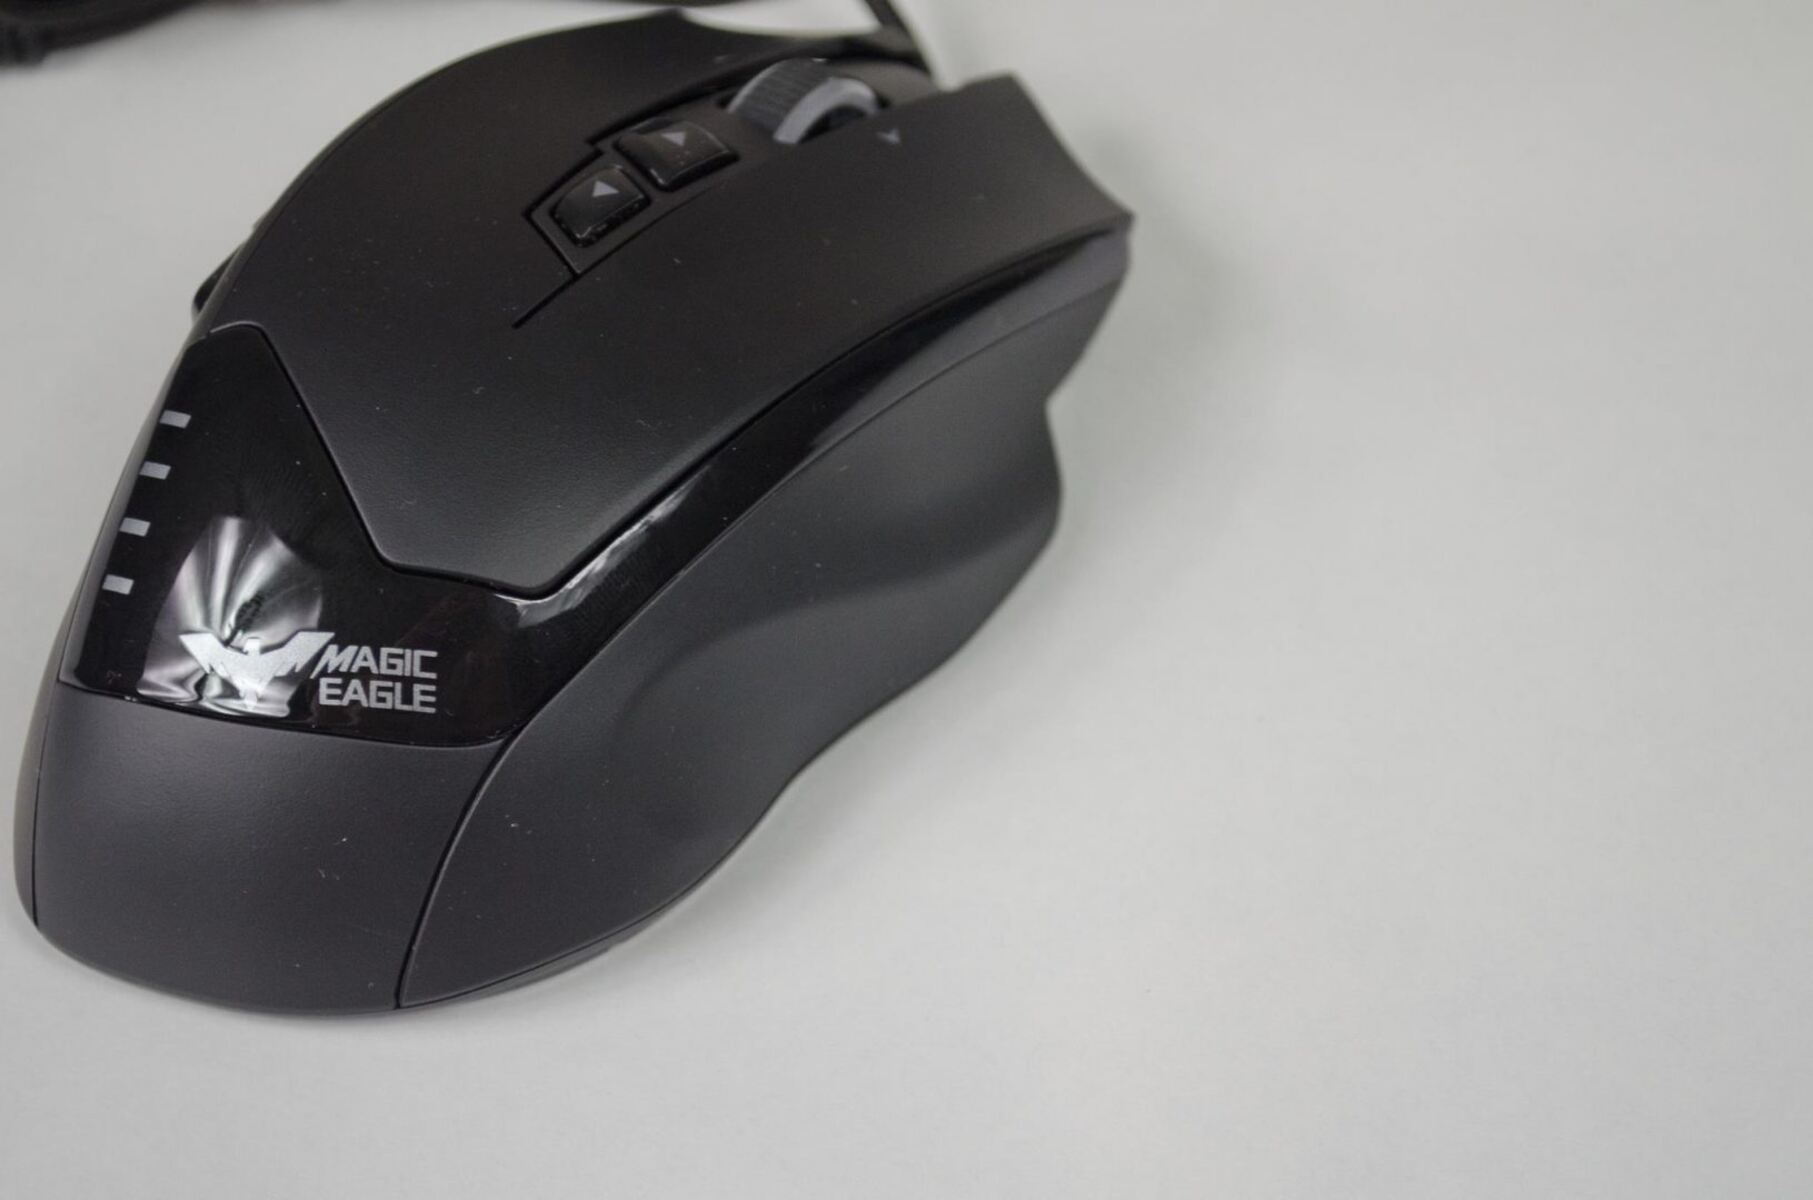 Havit Magic Eagle Gaming Mouse: How To Open